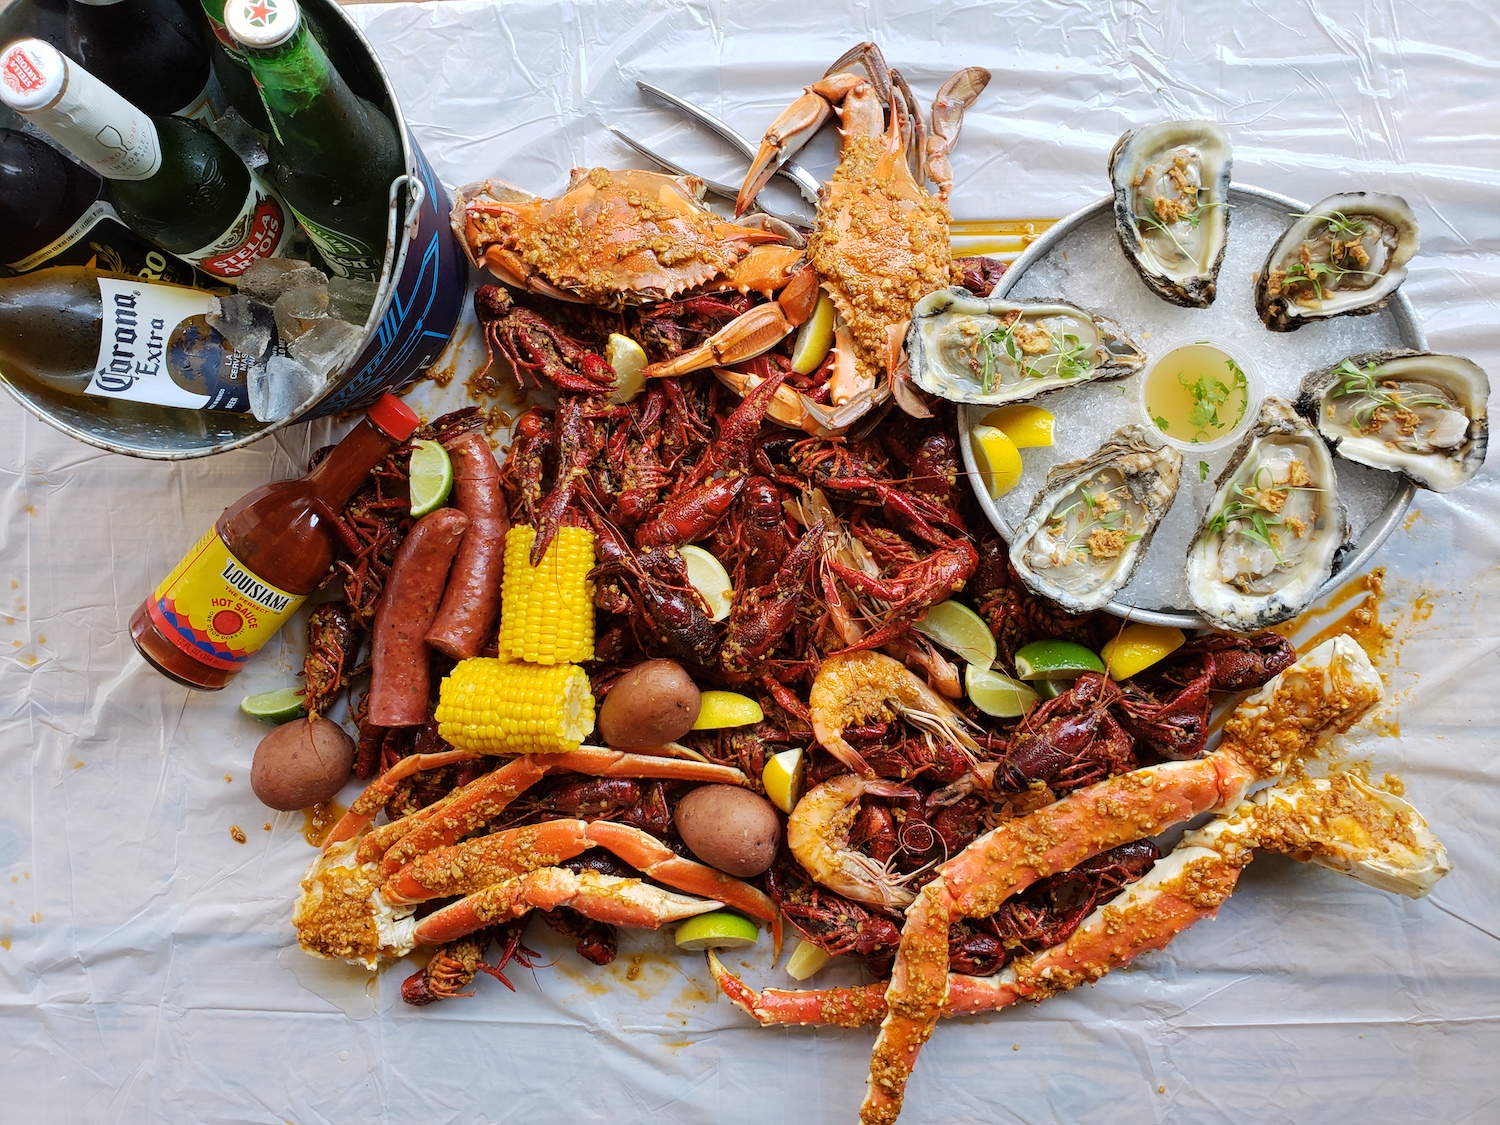 Crawfish, shrimp, crab, oysters, potatoes, corn and beer in a pile 